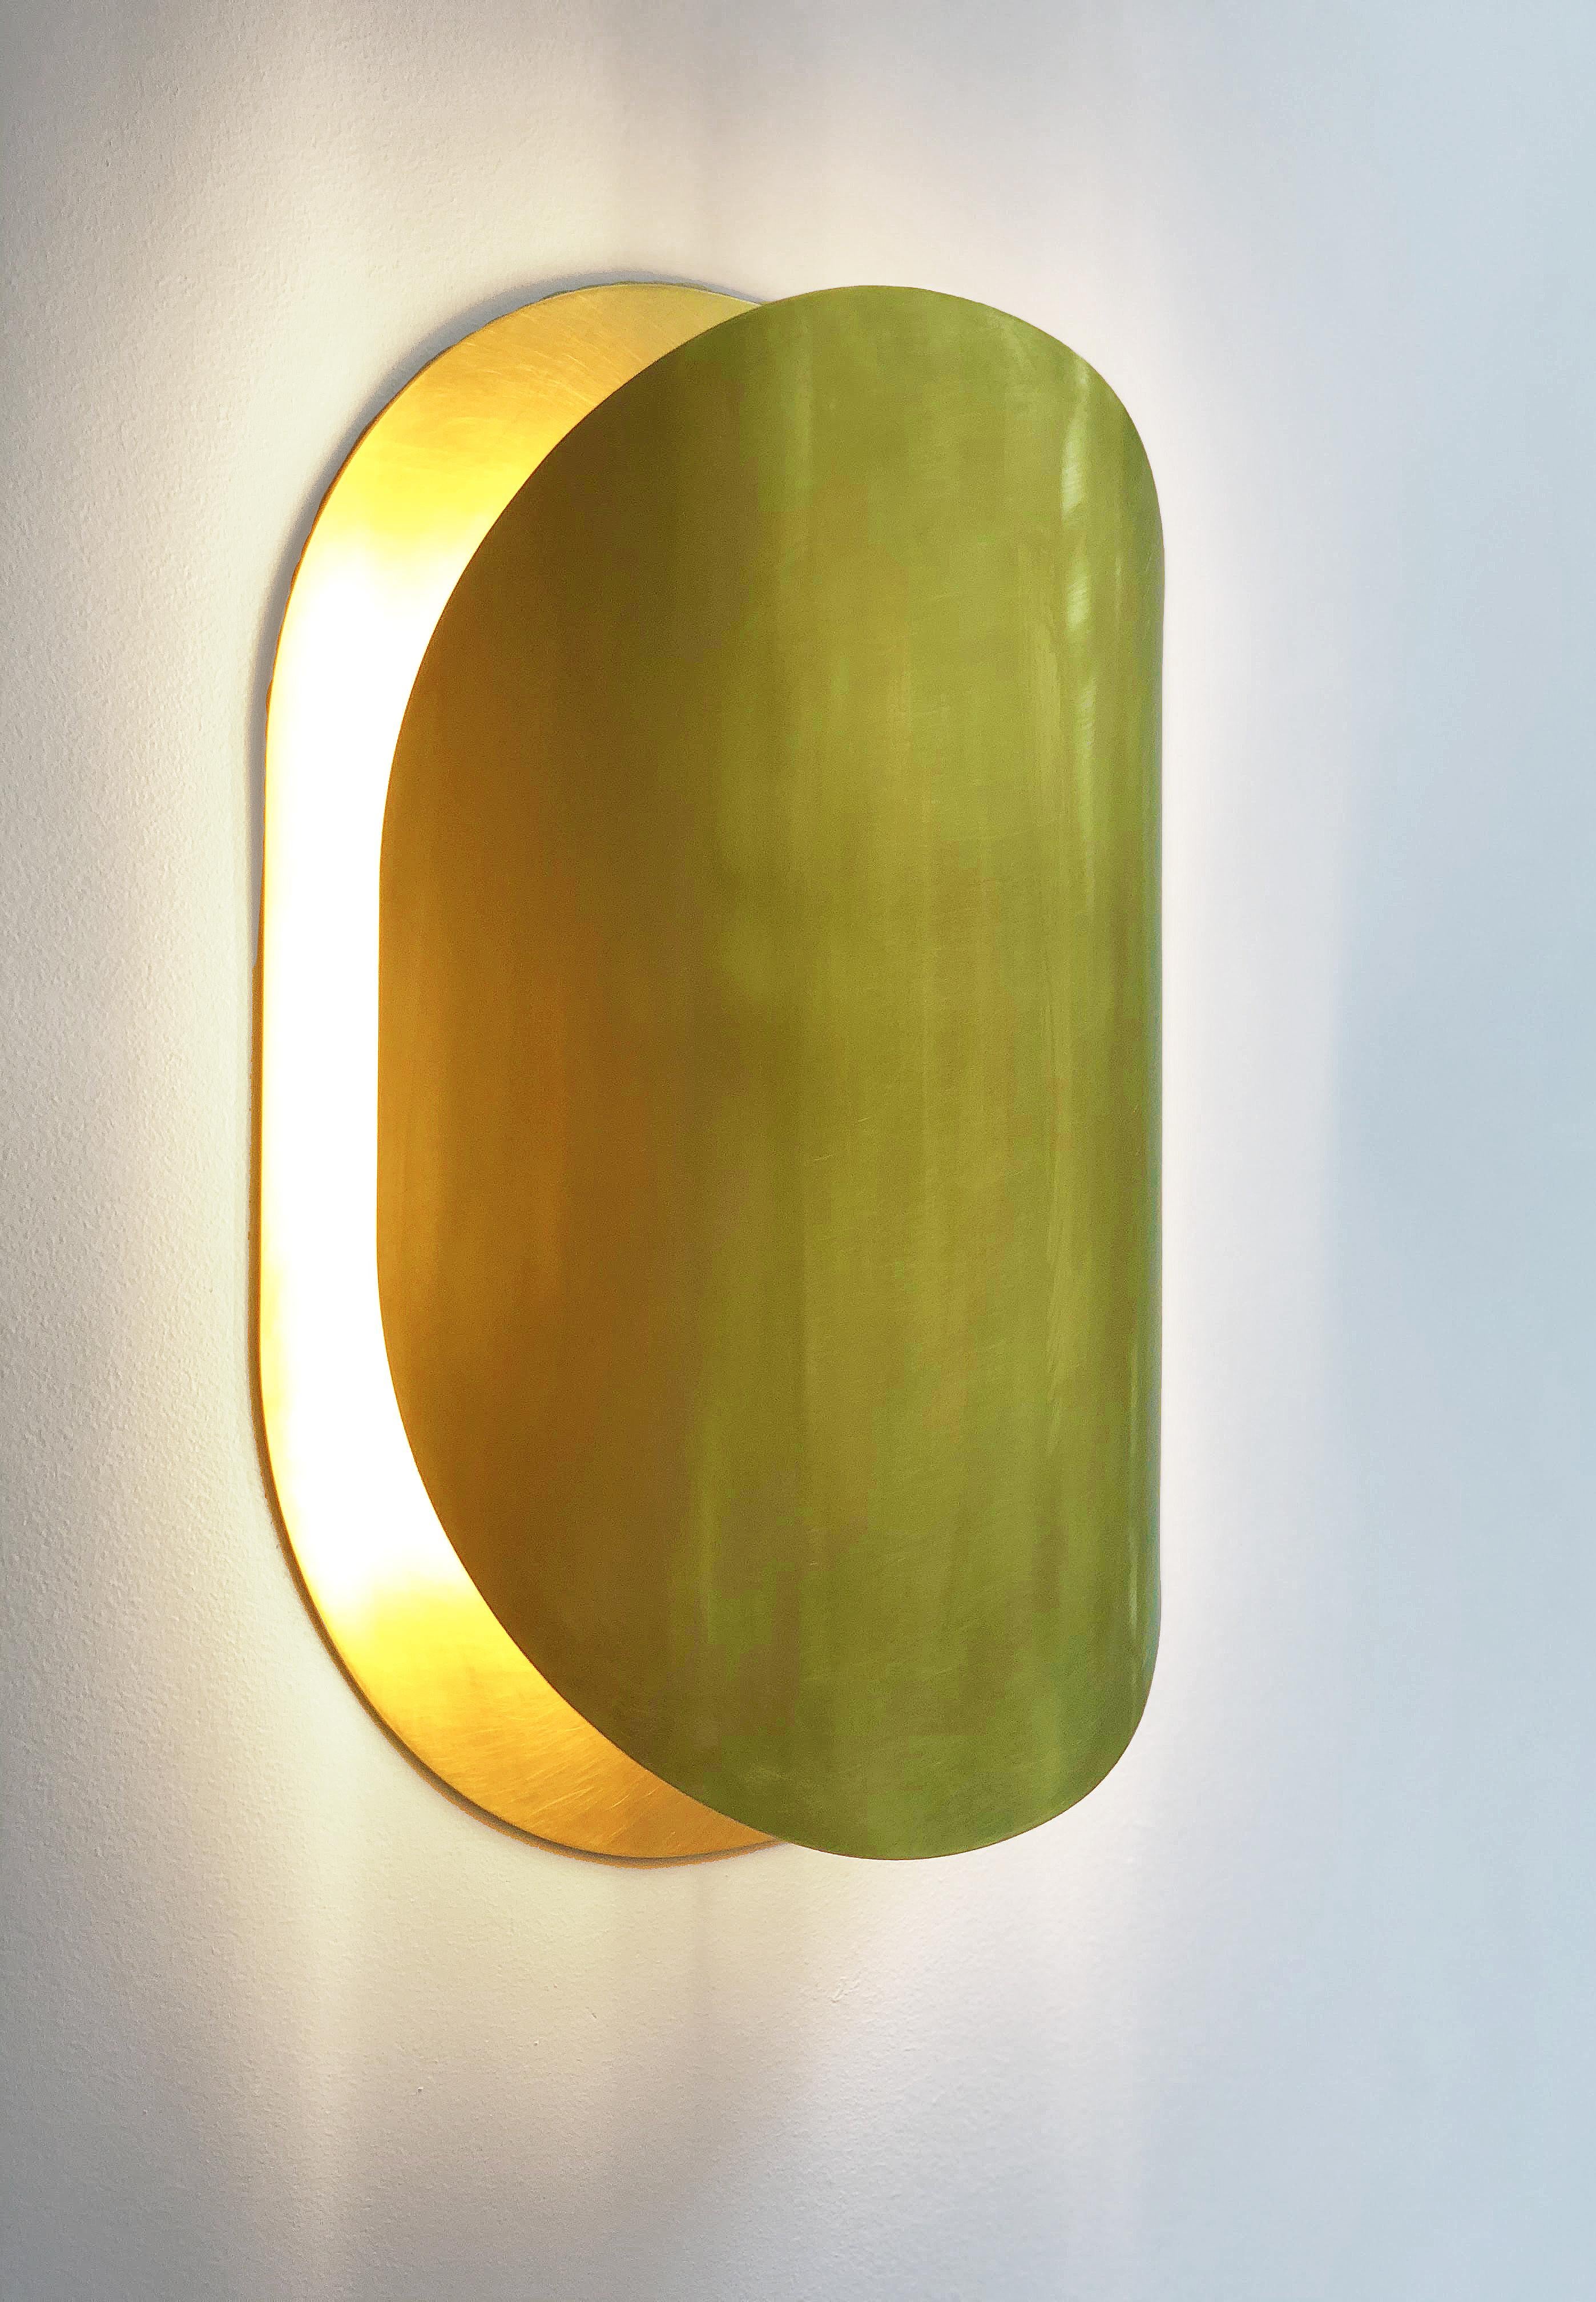 The Astra sconce light is the result of research to create a warm and vibrant yet ecological light. 
It recalls the mesmerizing effect of a lunar eclipse, playing around simple shapes to capture
interesting lighting effects. The curved brass